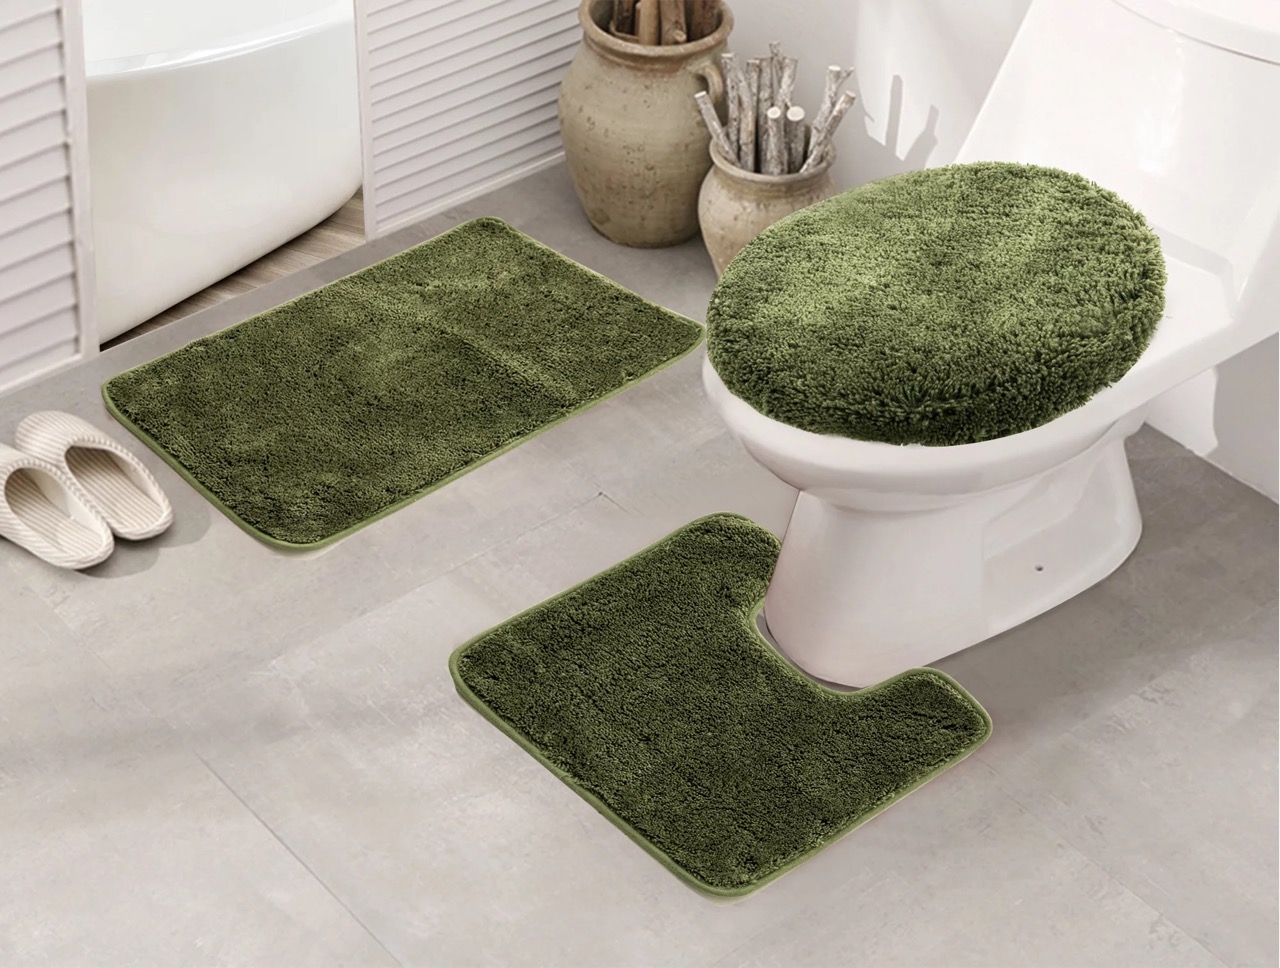 https://storables.com/wp-content/uploads/2023/08/12-amazing-toilet-rugs-for-bathroom-u-shaped-for-2023-1690899585.jpeg